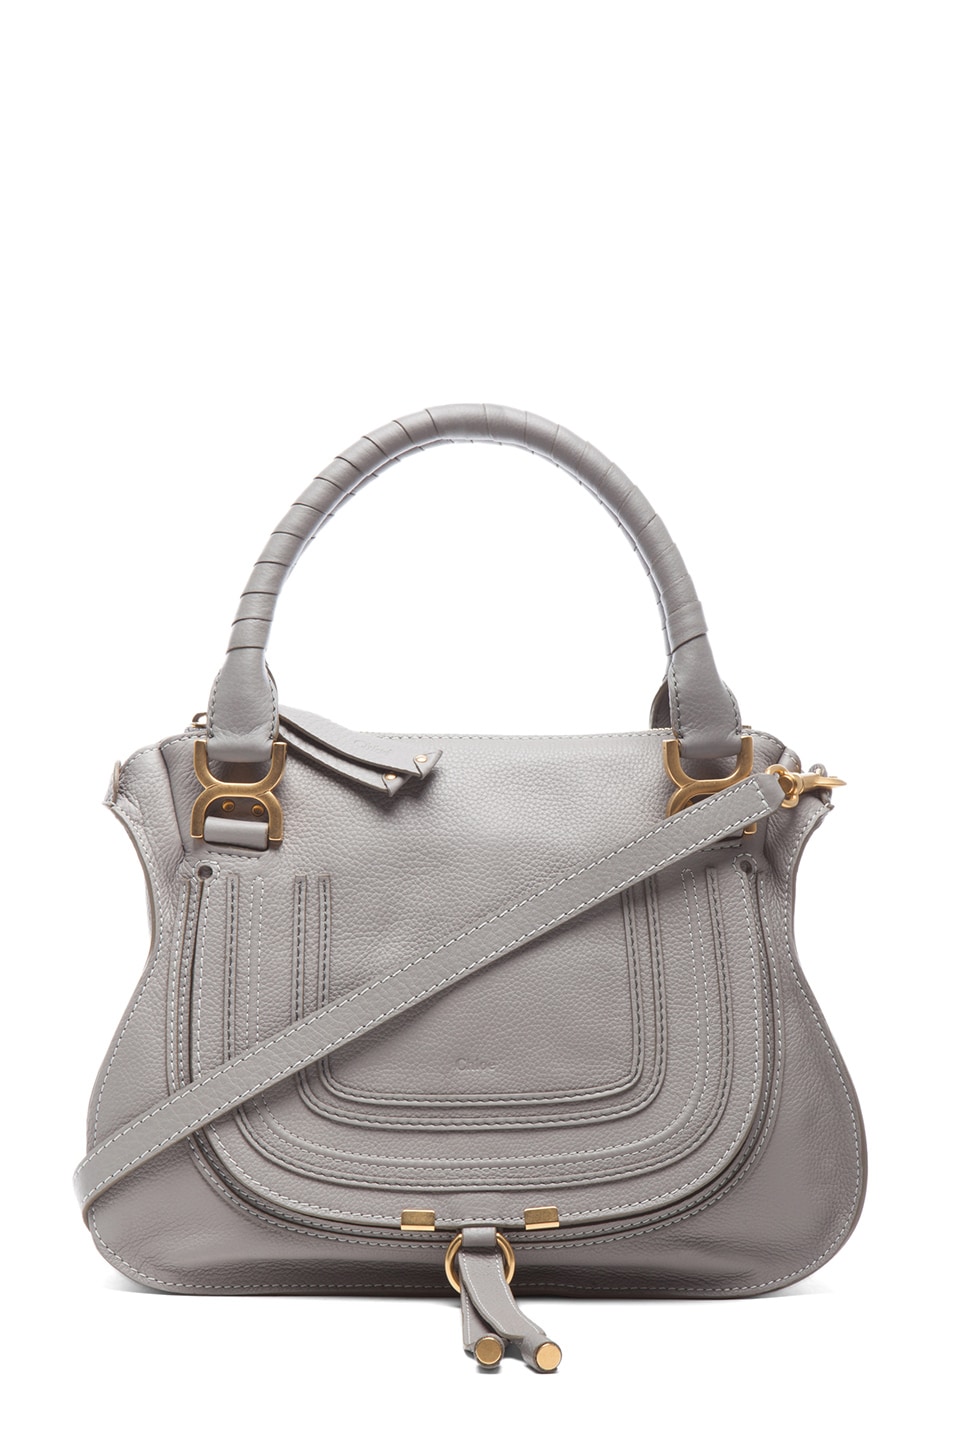 Image 1 of Chloe Small Marcie Grained Leather Satchel in Cashmere Grey